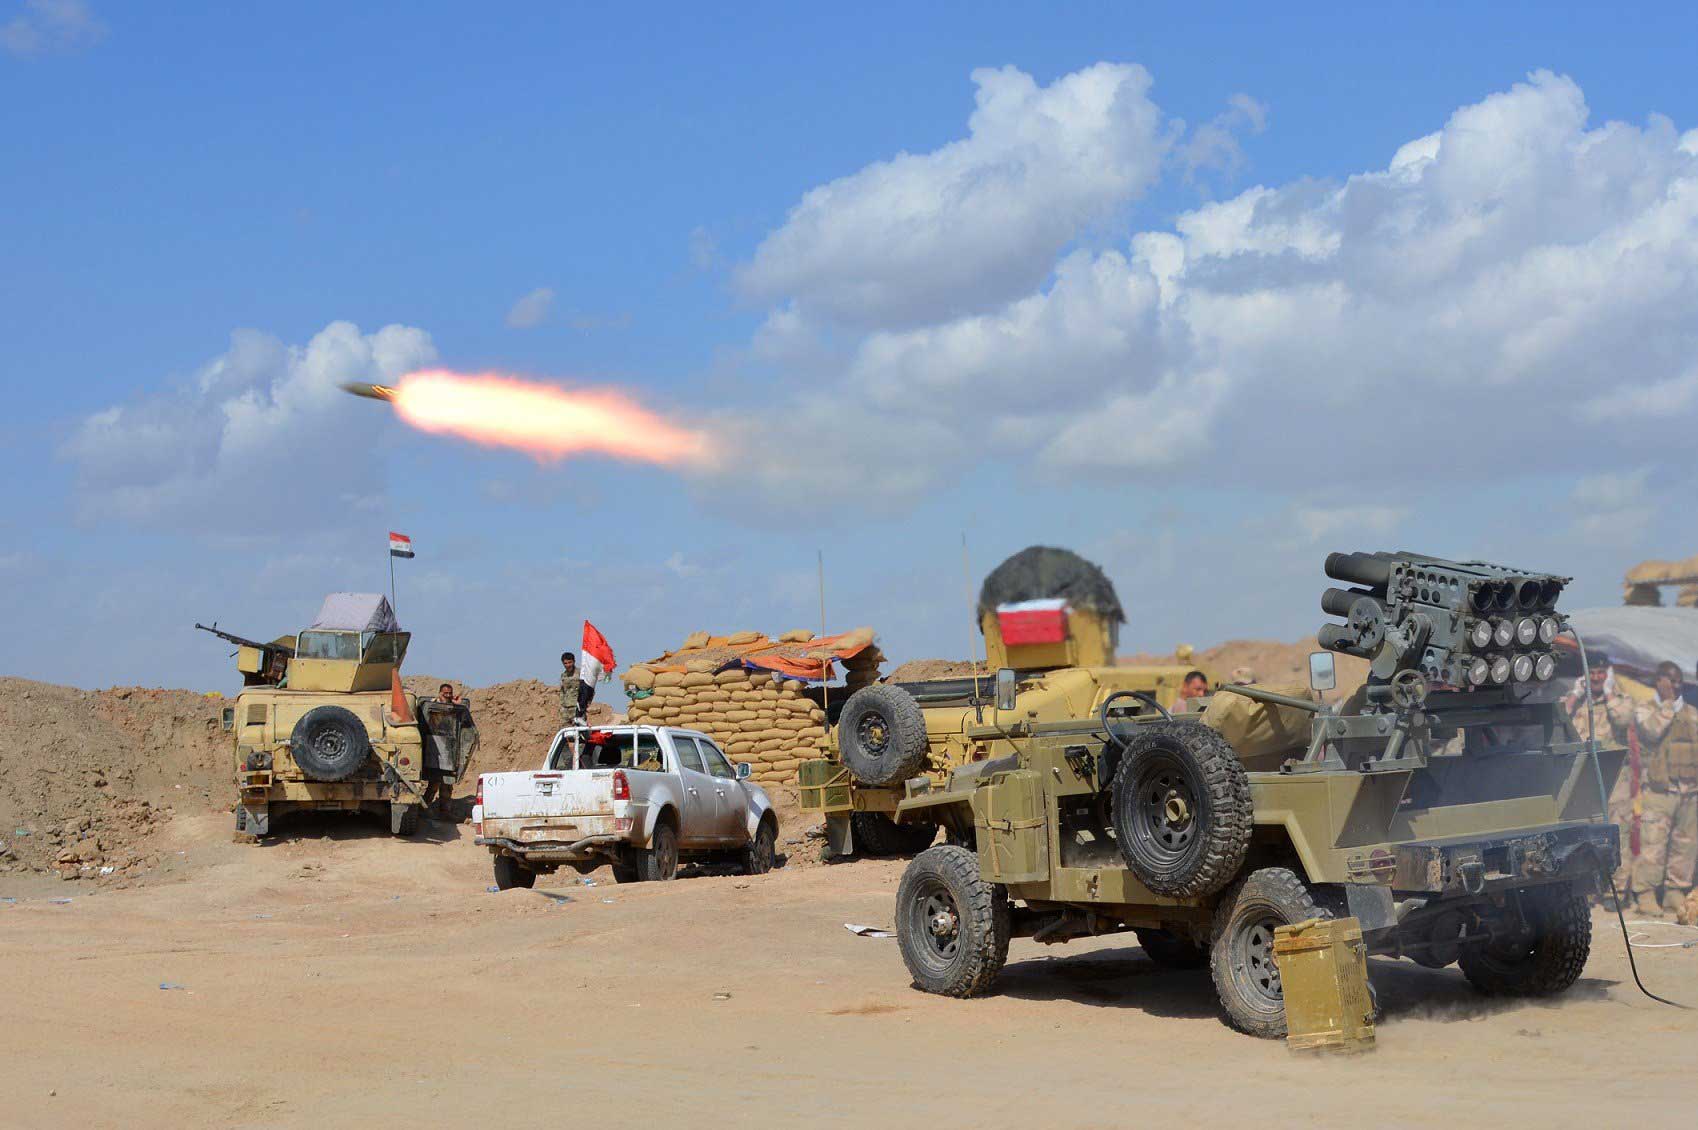 Iraqi government forces and allied militias fire weaponry from a position in the northern part of Diyala province, bordering Salaheddin province, as they take part in an assault to retake the city of Tikrit from ISIS militants, March 2, 2015. (Younis Al-Bayati—AFP/Getty Images)